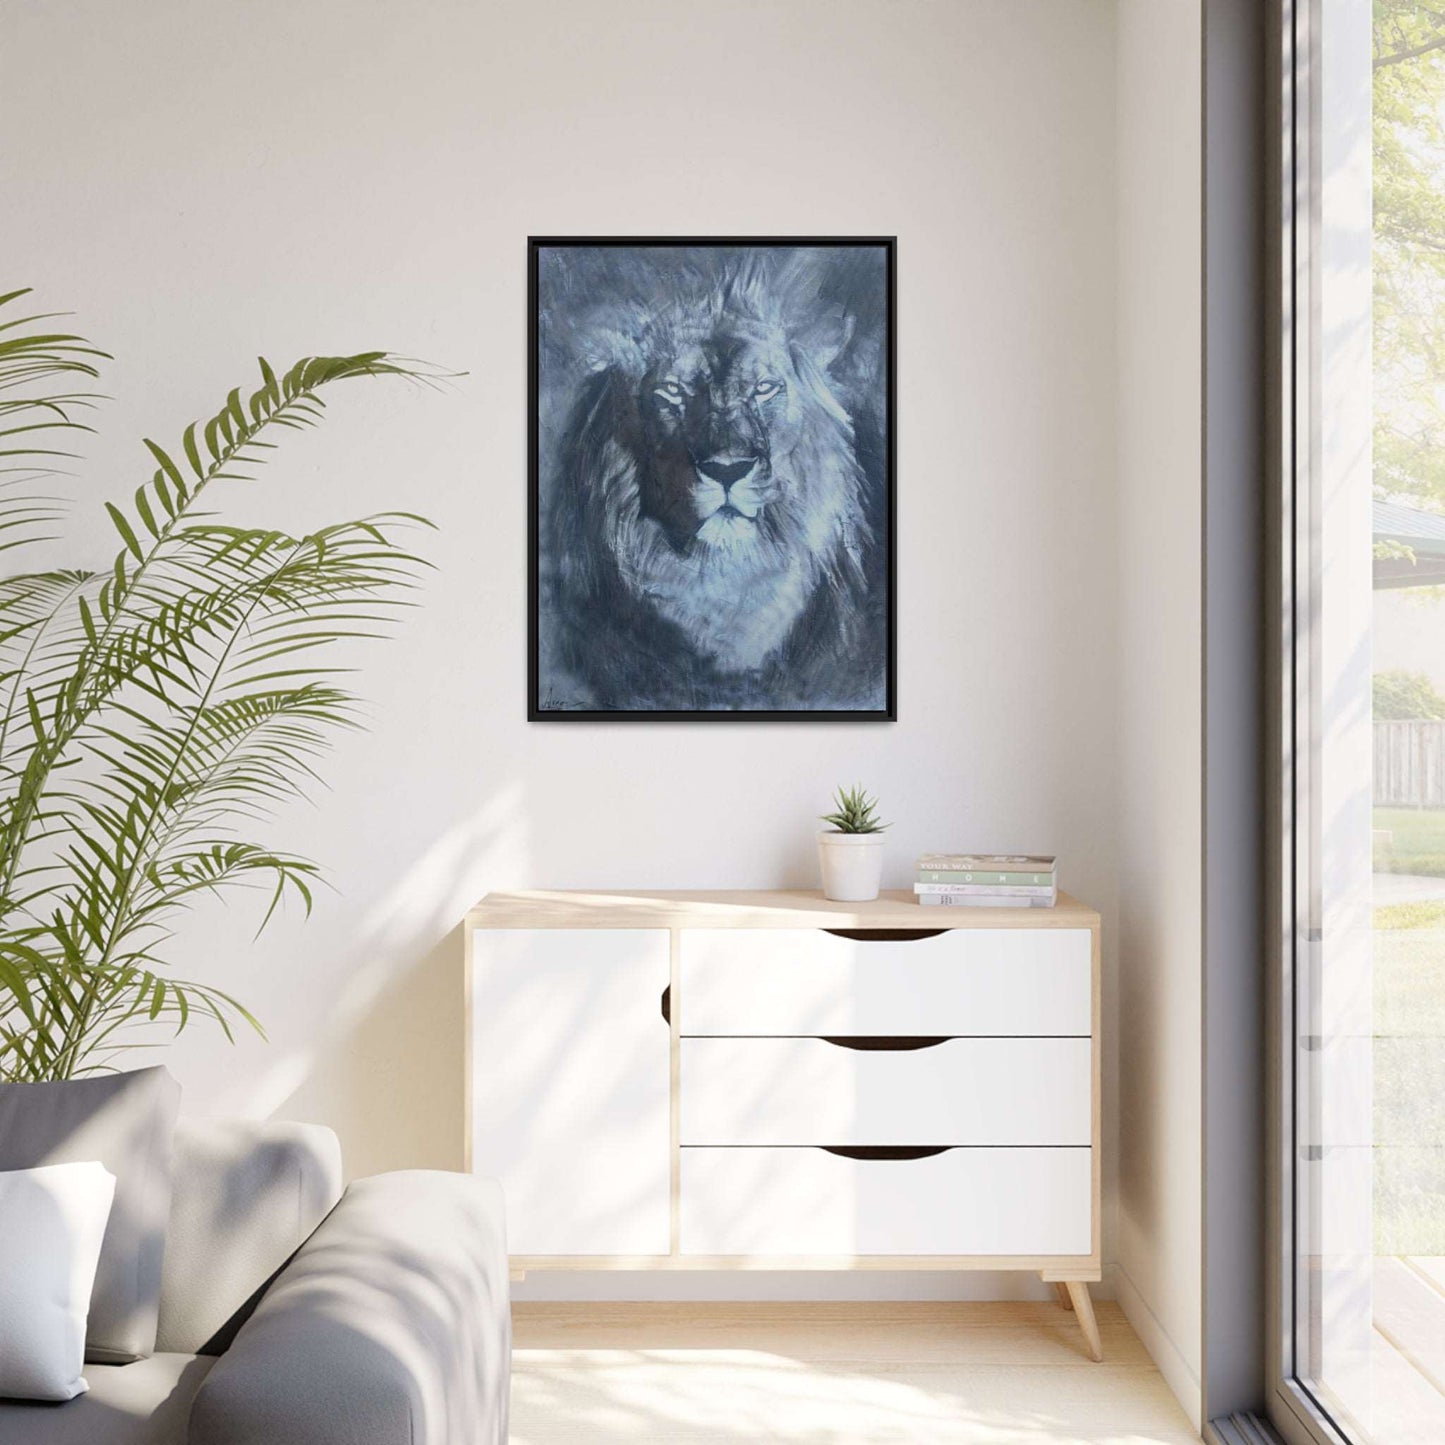 The Lion by The Baroque Knight fine art framed print